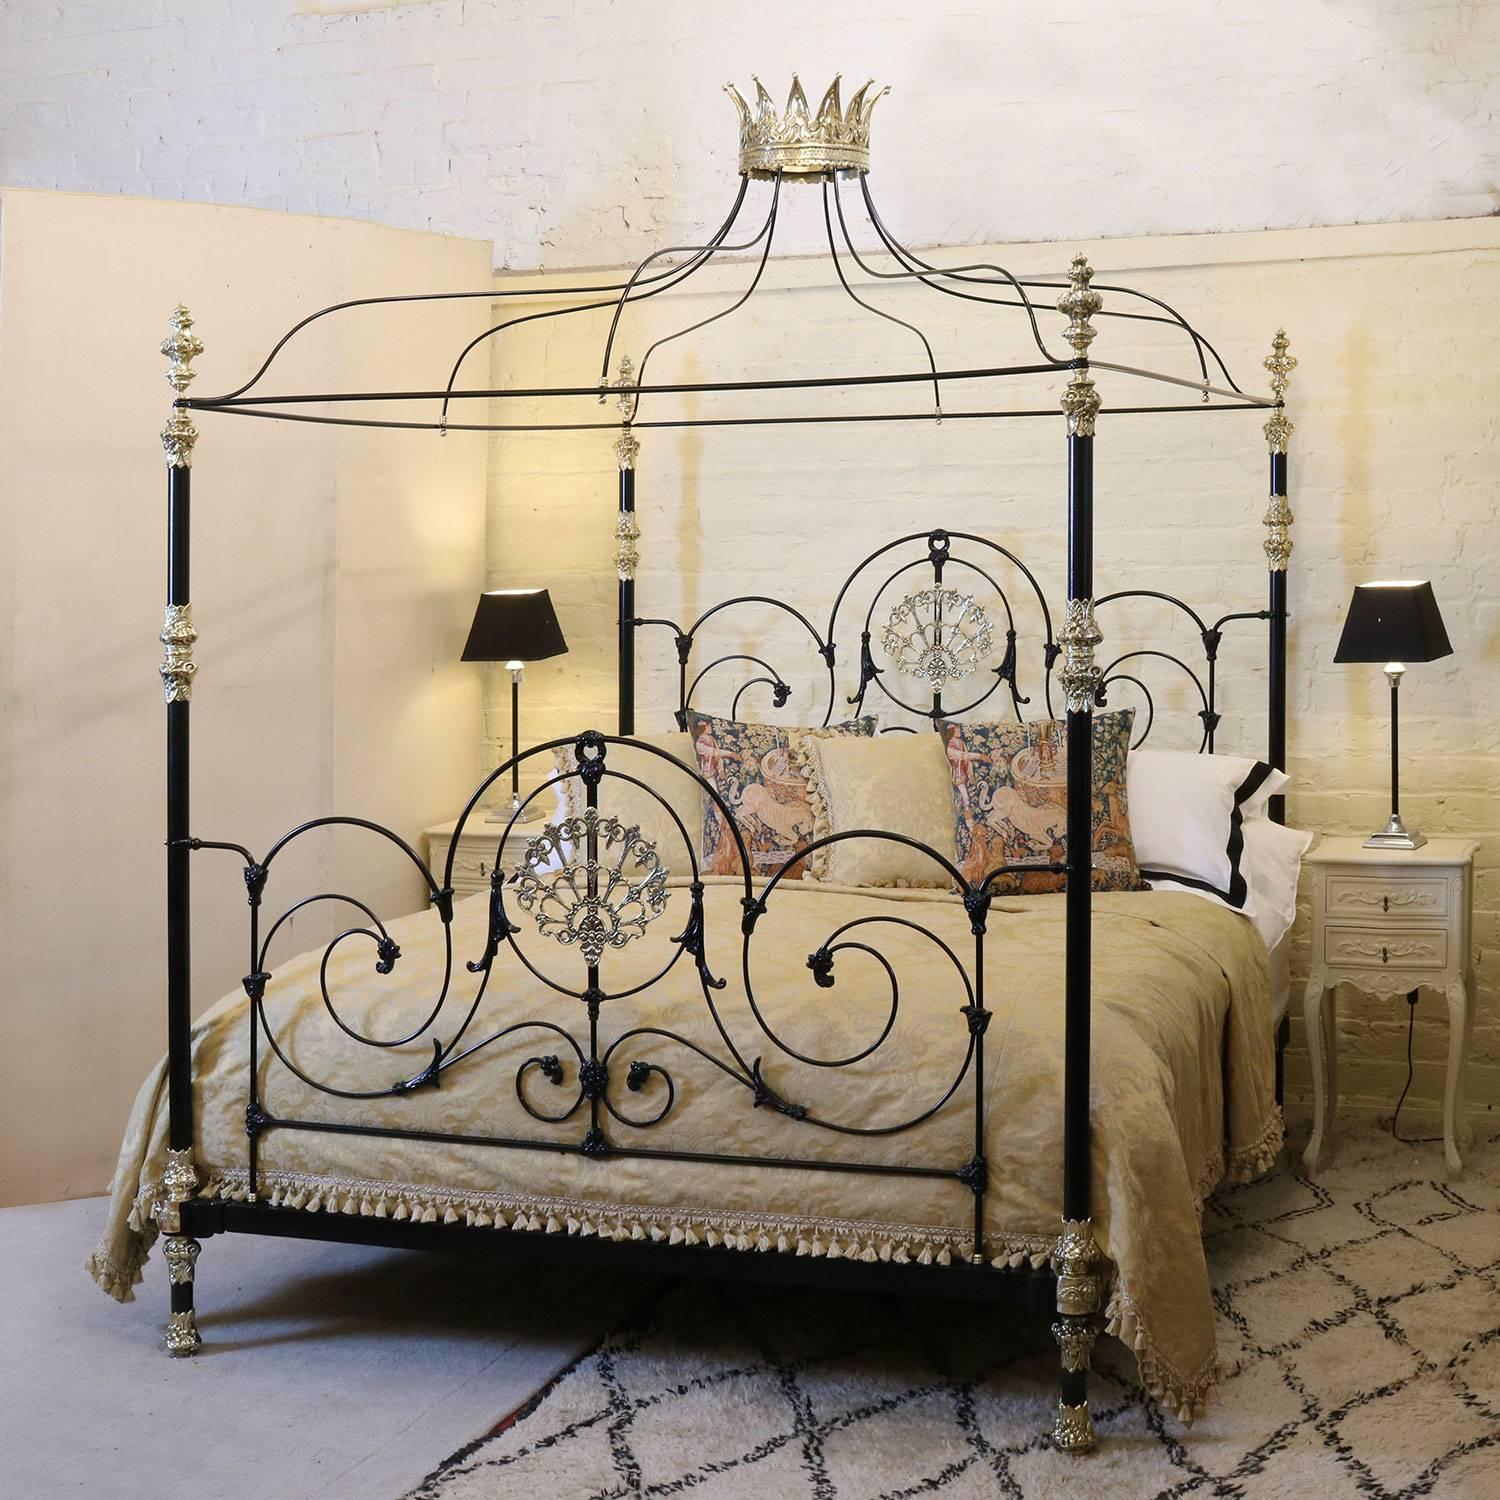 A made-to-order bespoke four poster bed with ornate brass castings, tentacle canopy and brass crown. This hand crafted bed is a bespoke piece designed with specific dimensions. The bed is currently black but other colours are optional, including